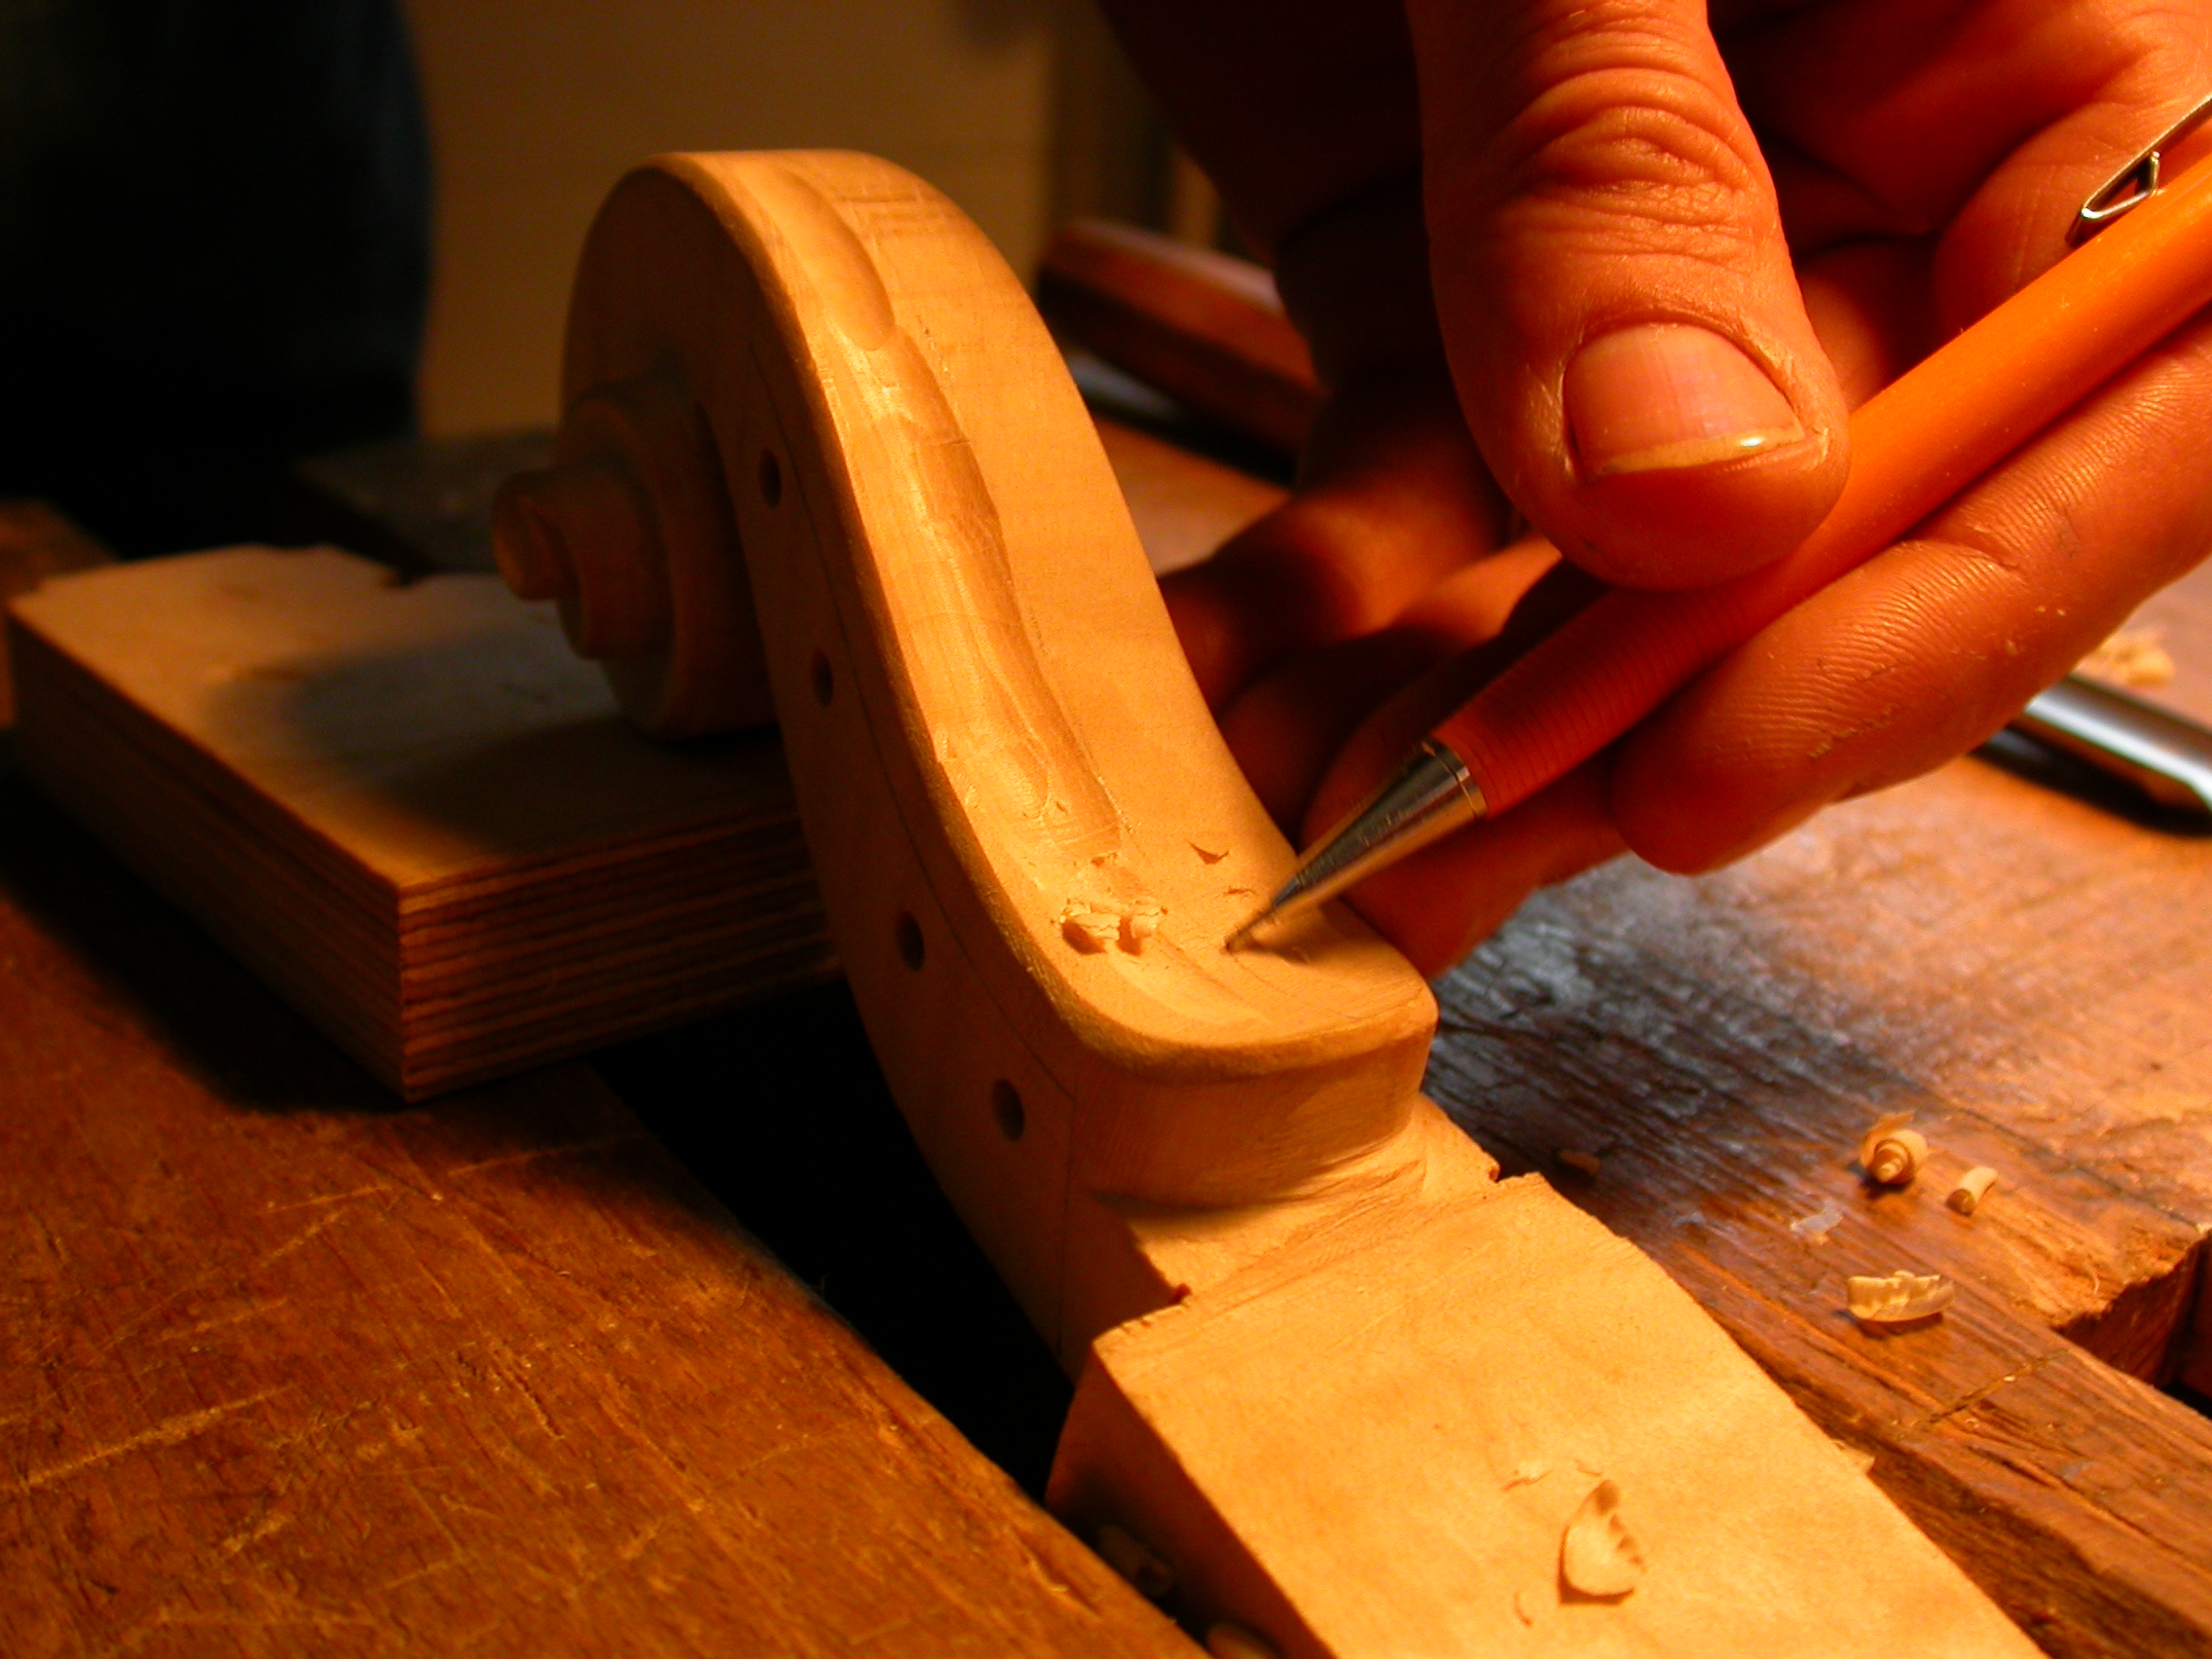 paul violin in the making wood crafy craftsman pen hand